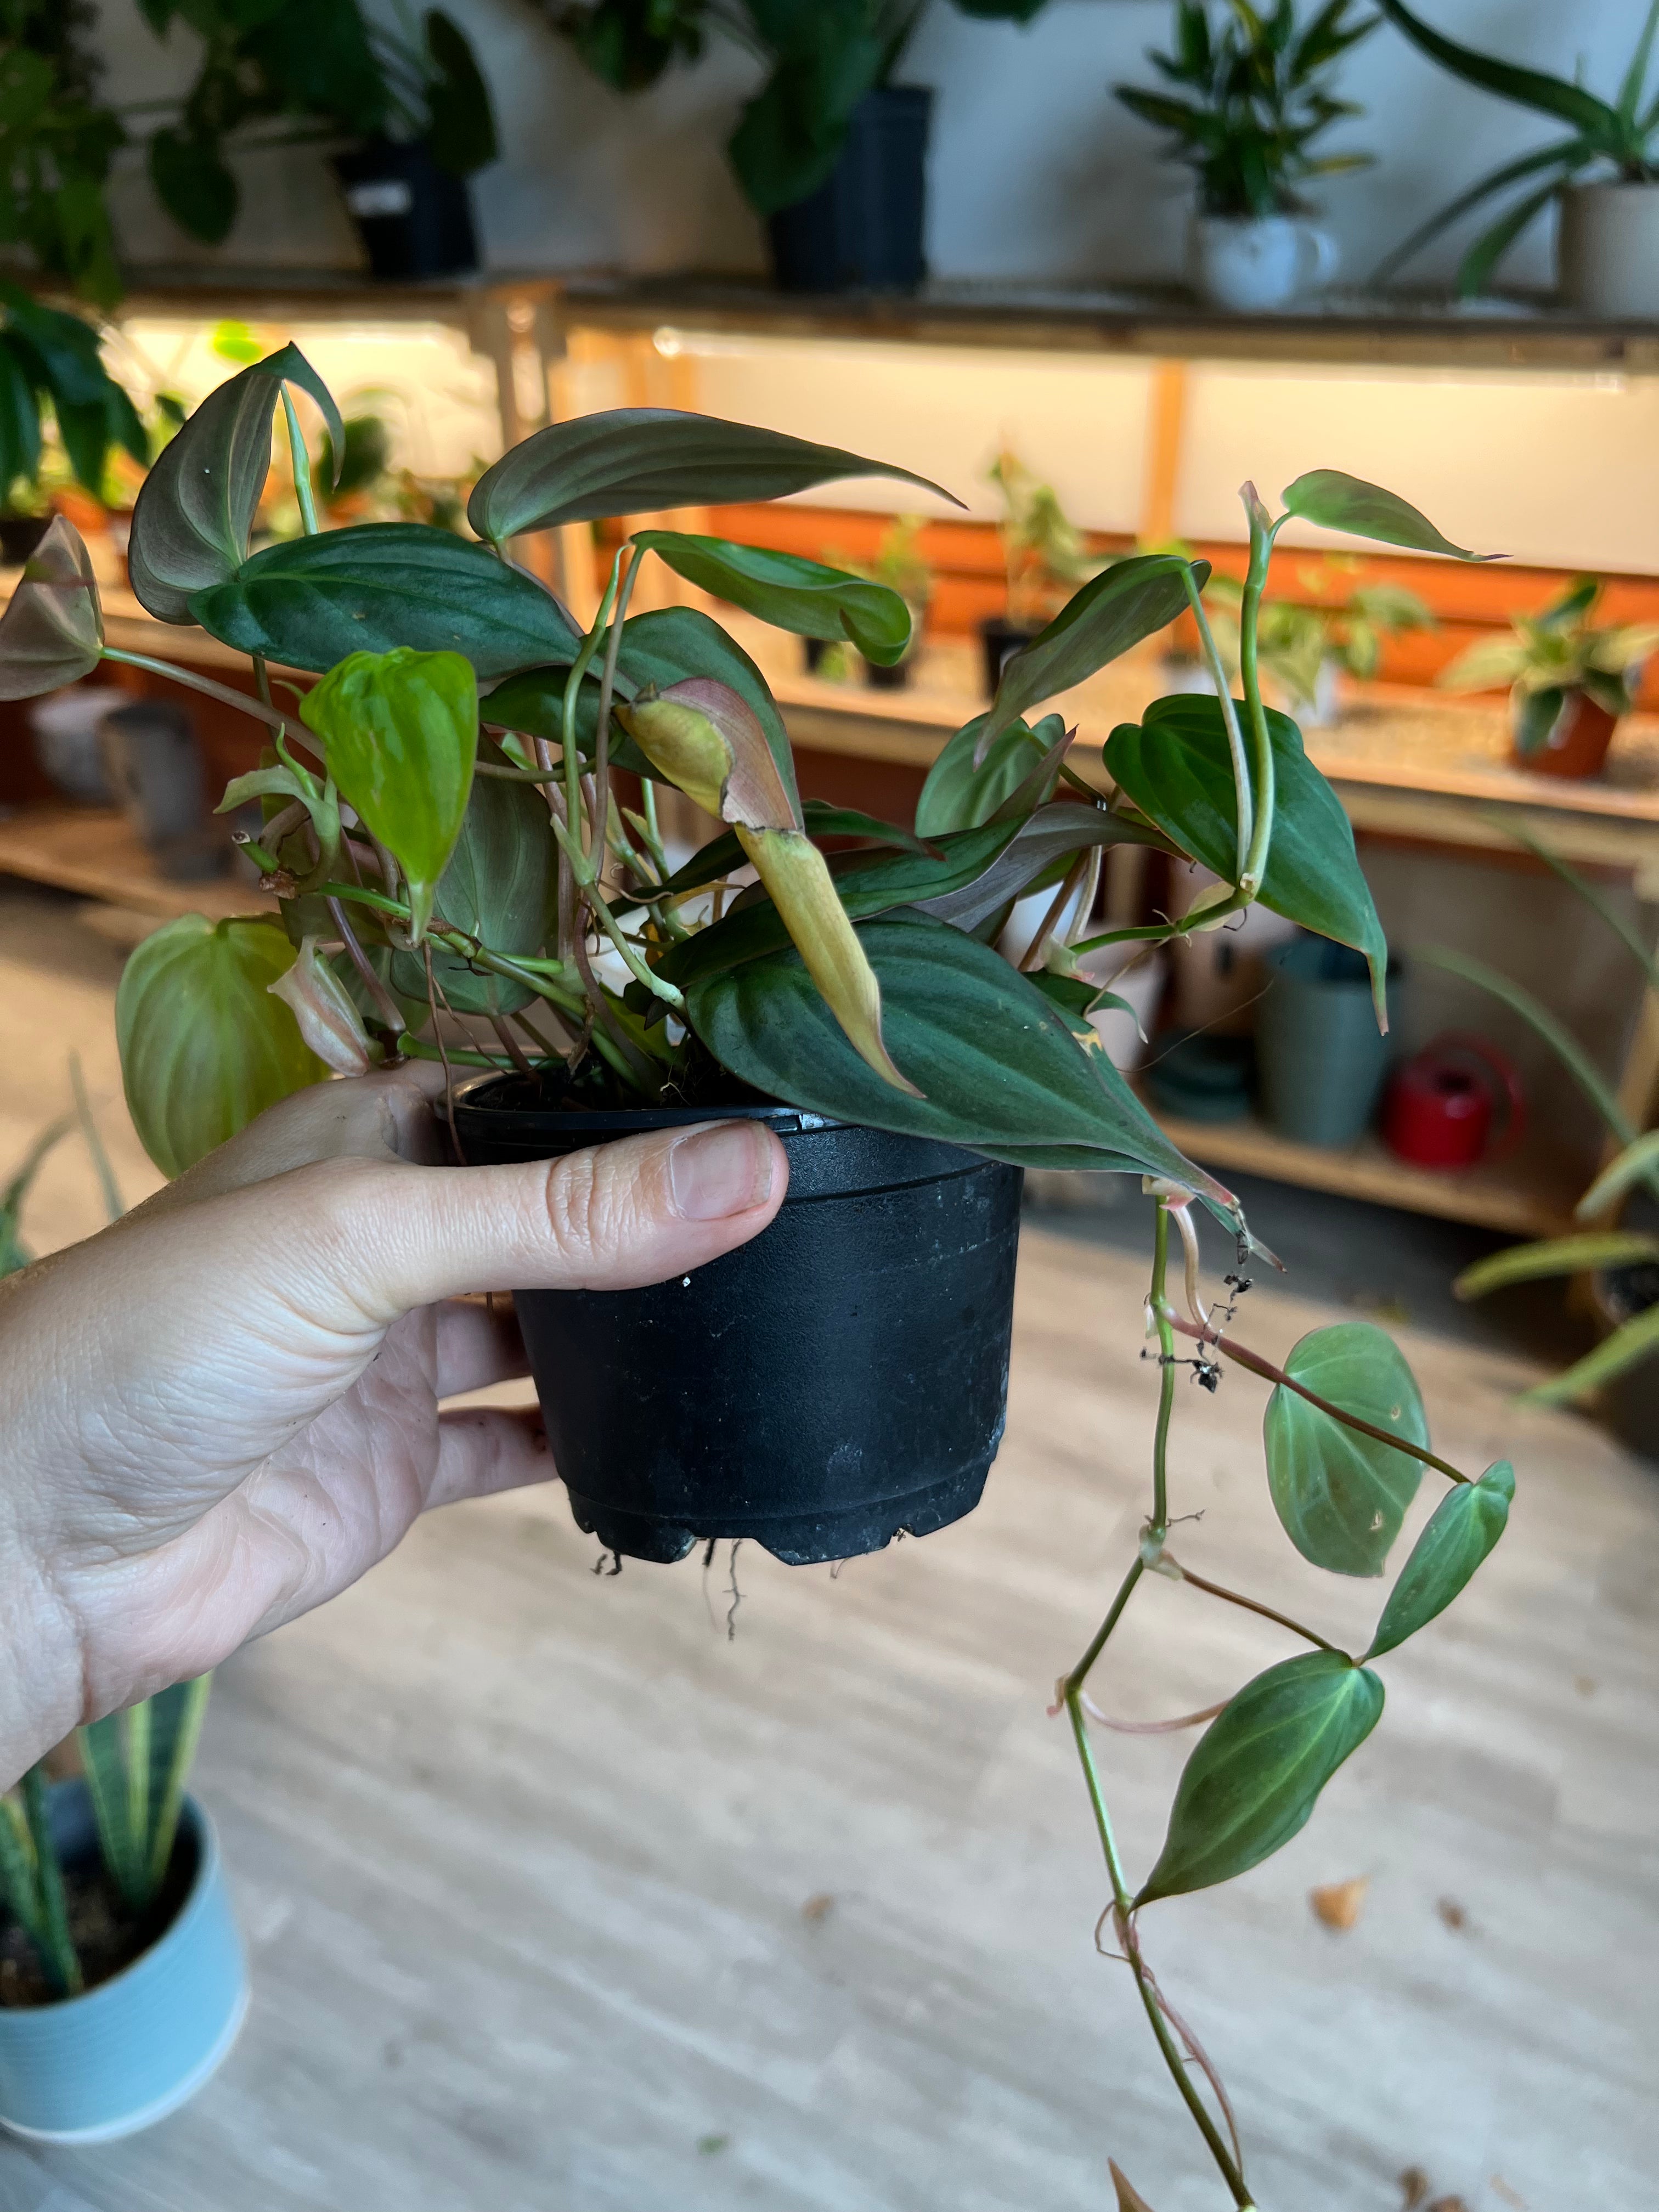 Philodendron Hederaceum - Mican 4"